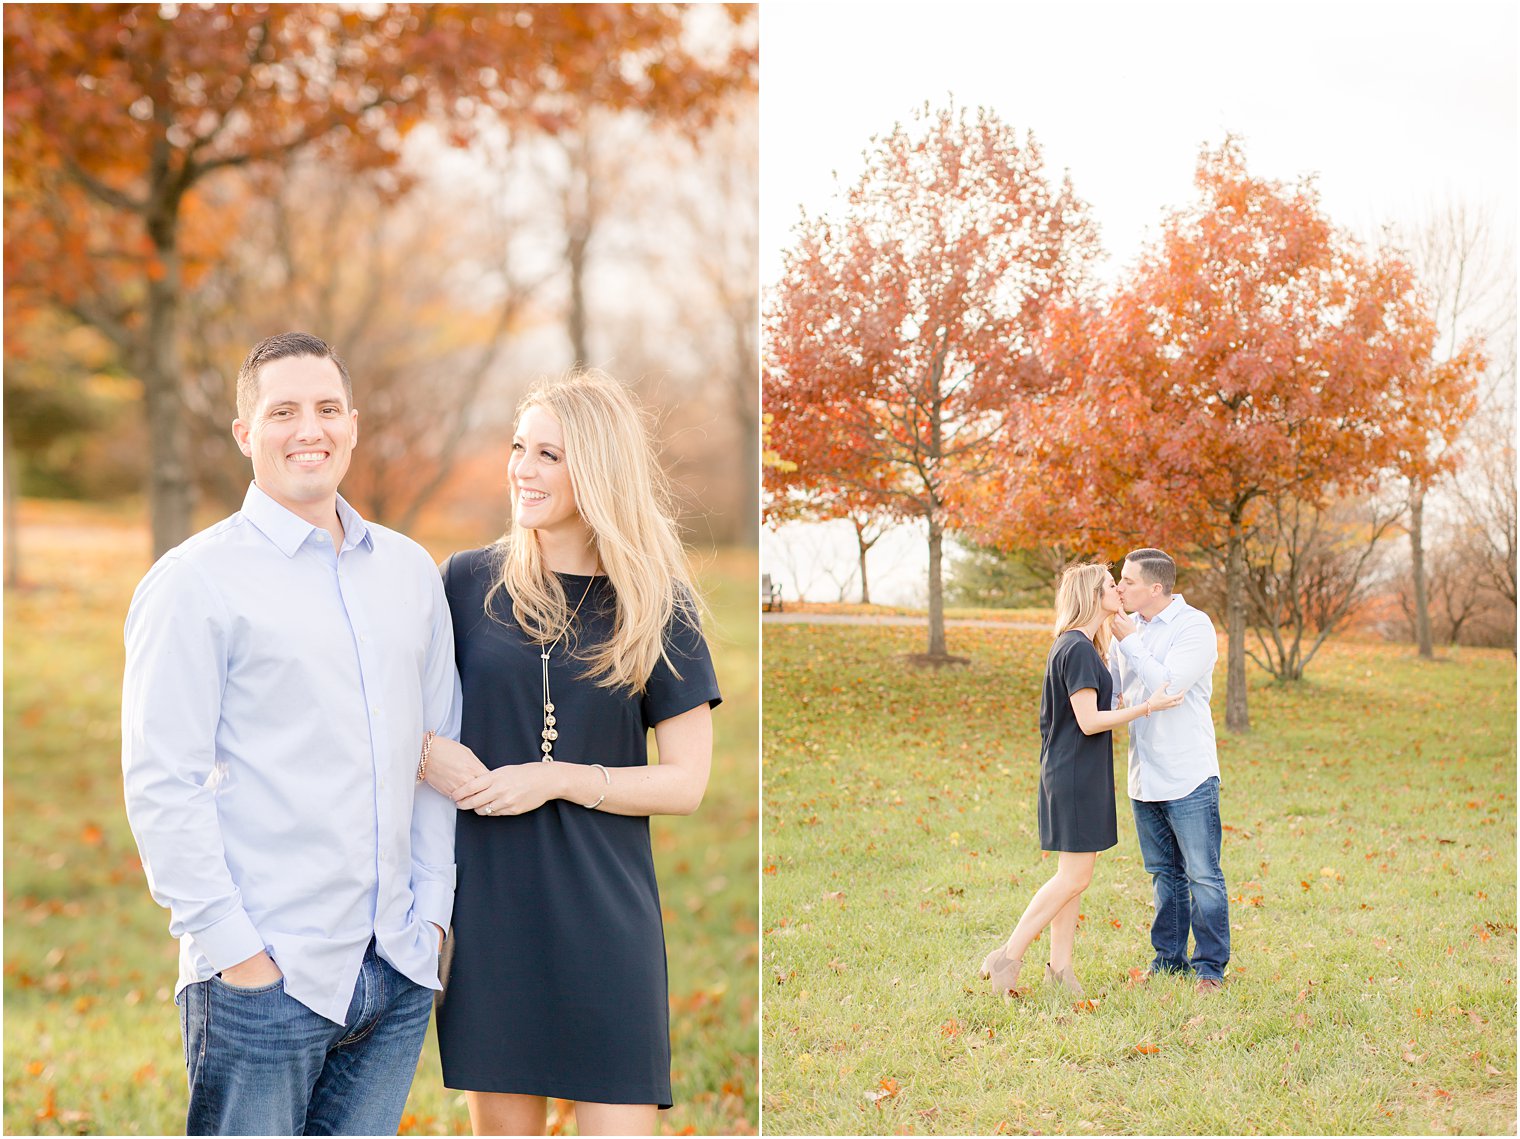 Engagement session with fall foliage at Liberty State Park